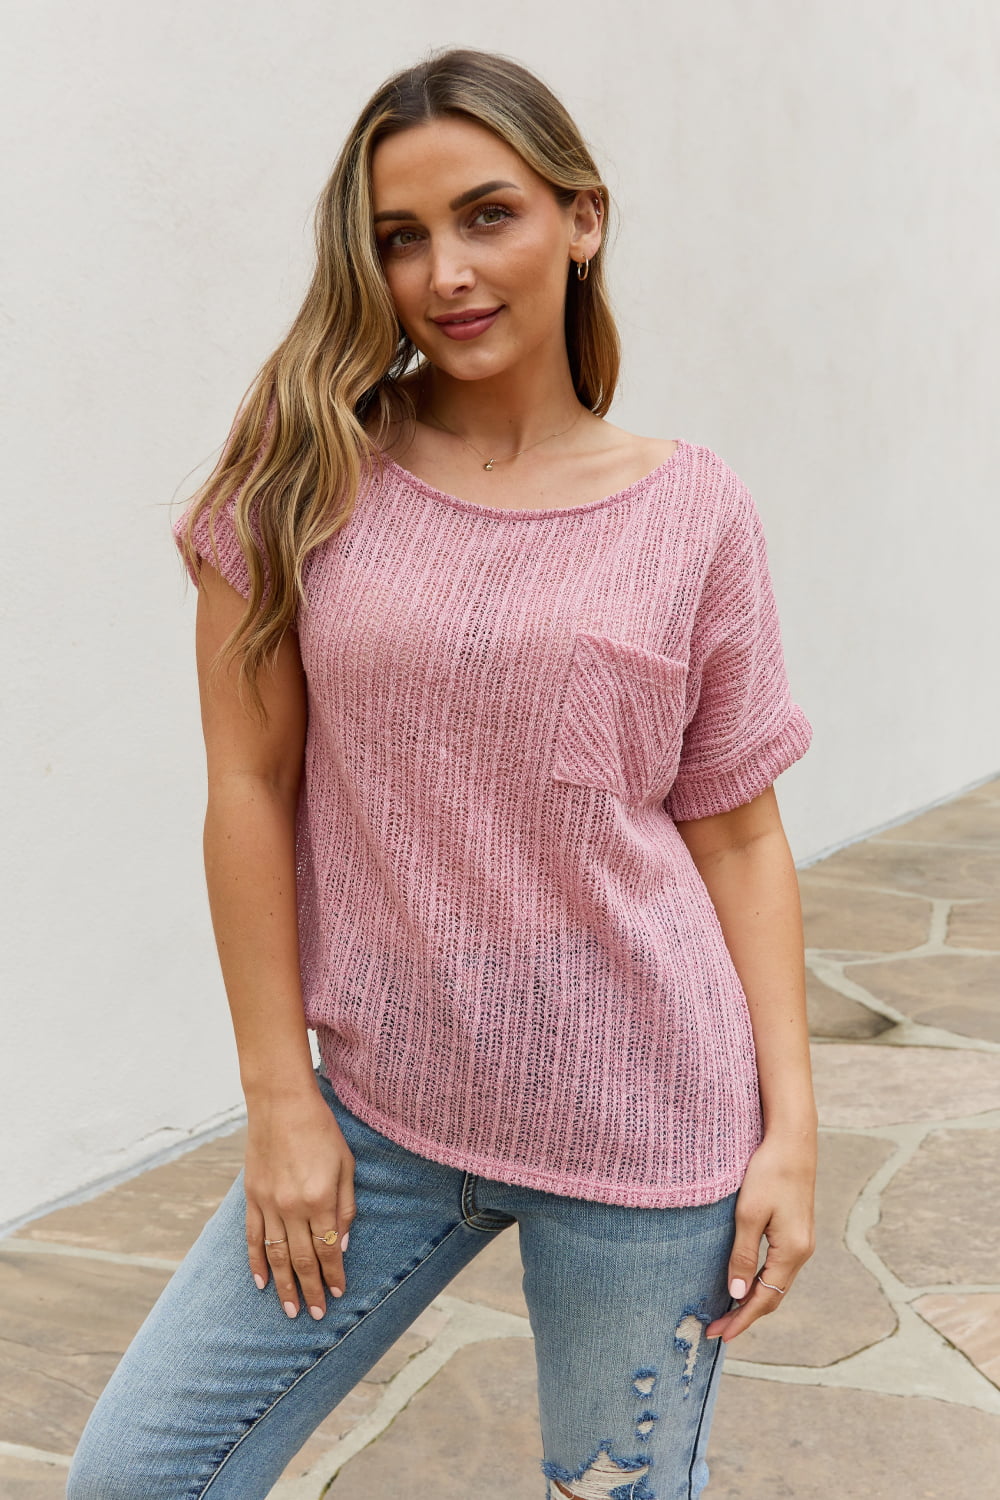 Chunky Knit Short Sleeve Top in Mauve - Pink / S - Camis & Tops - Shirts & Tops - 1 - 2024